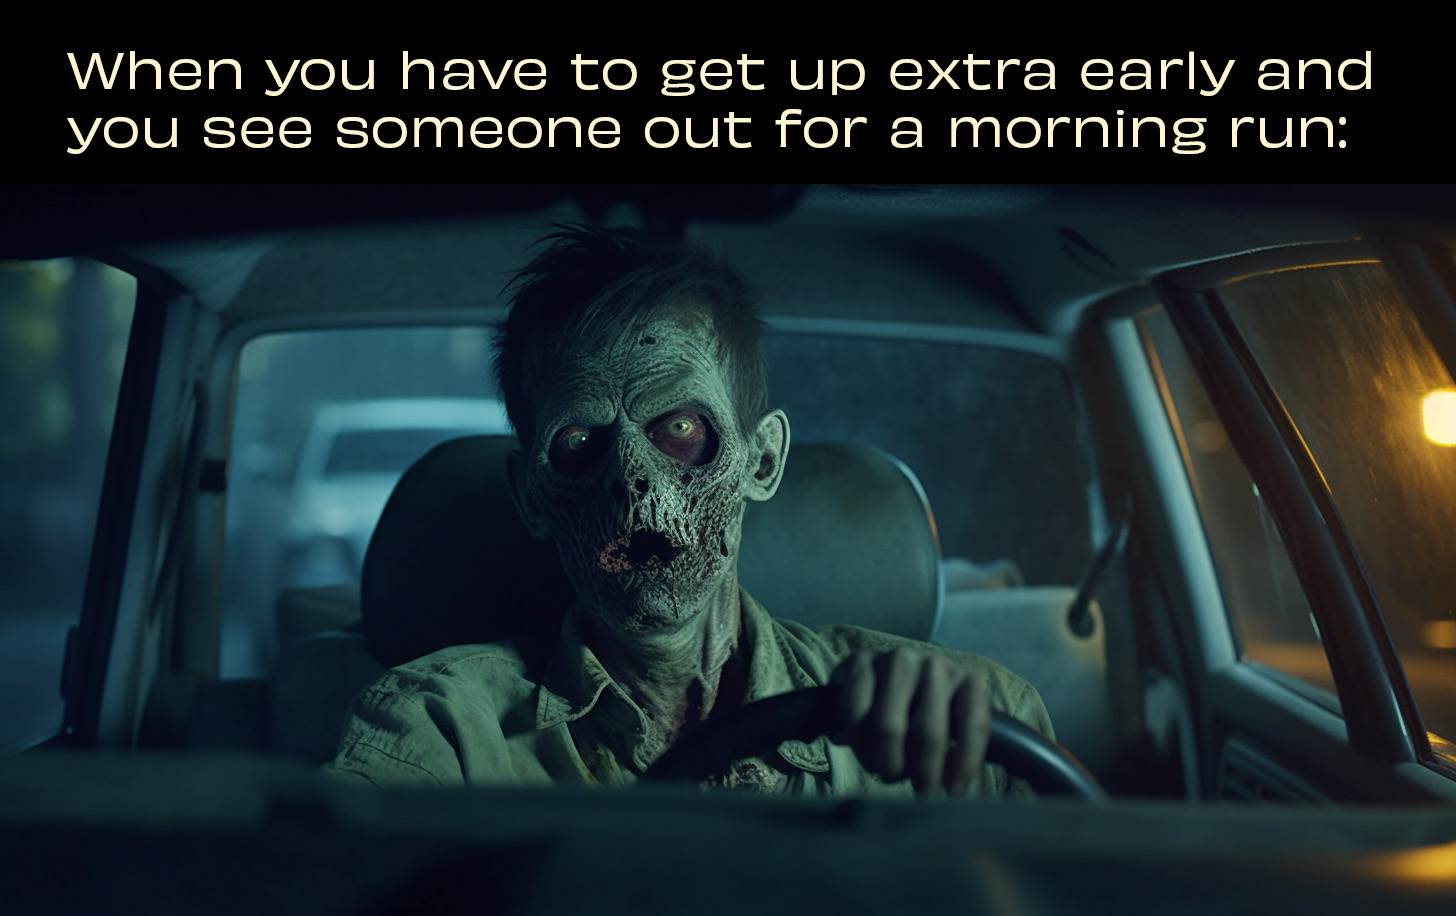 funny memes and pics - car - When you have to get up extra early and you see someone out for a morning run